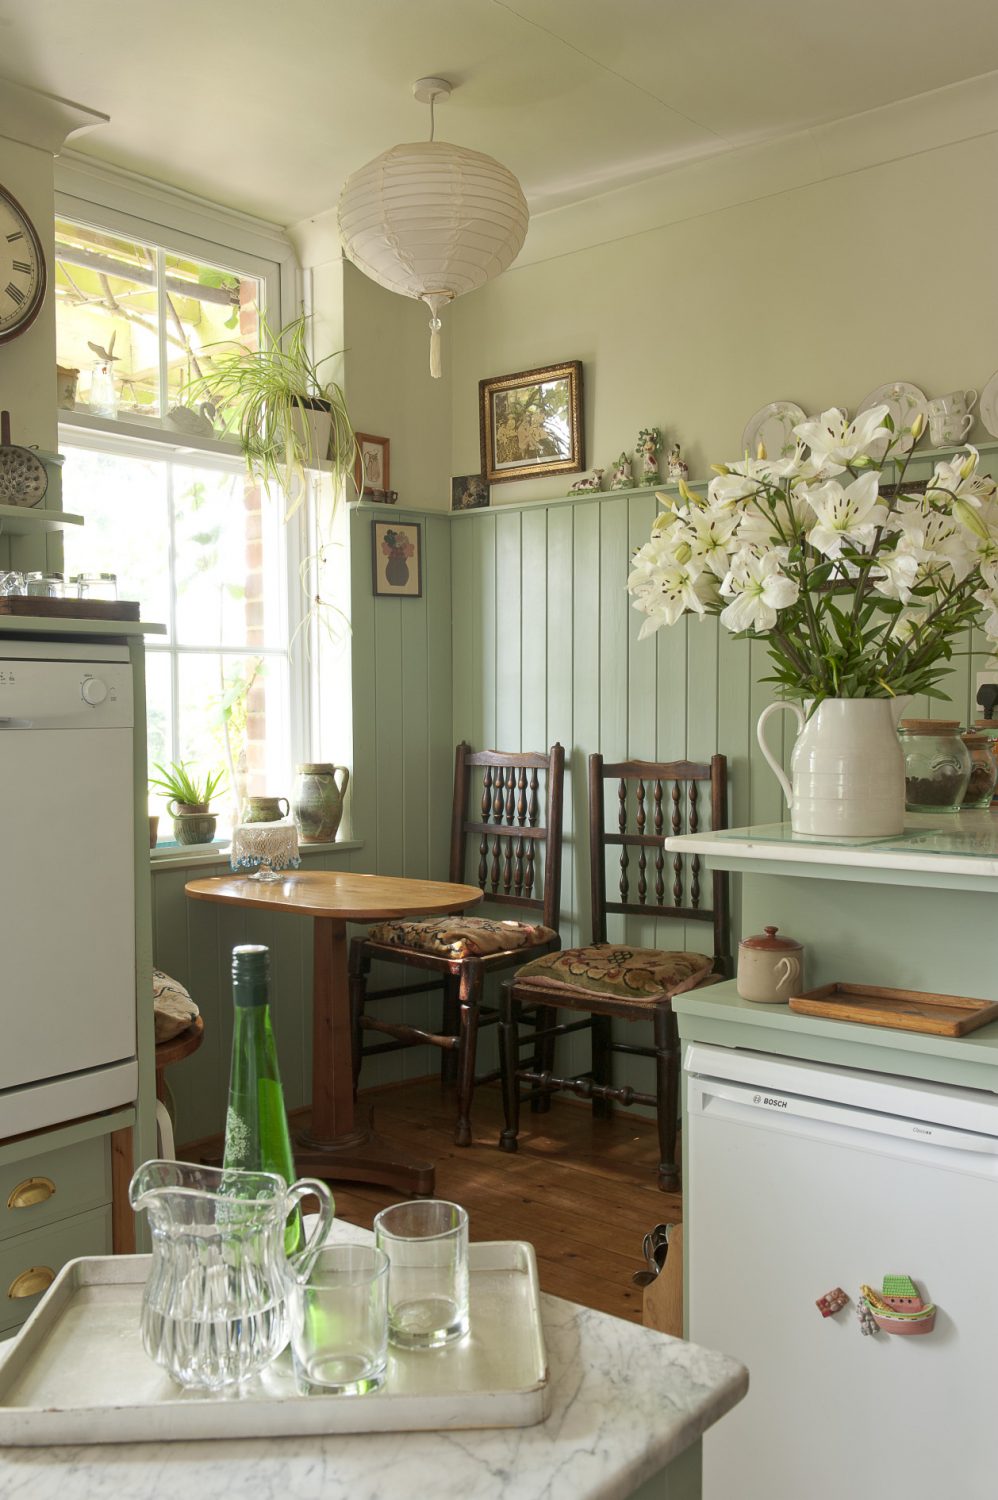 A little alcove breakfast table for two is nestled in one corner of the modest-sized shaker-style kitchen